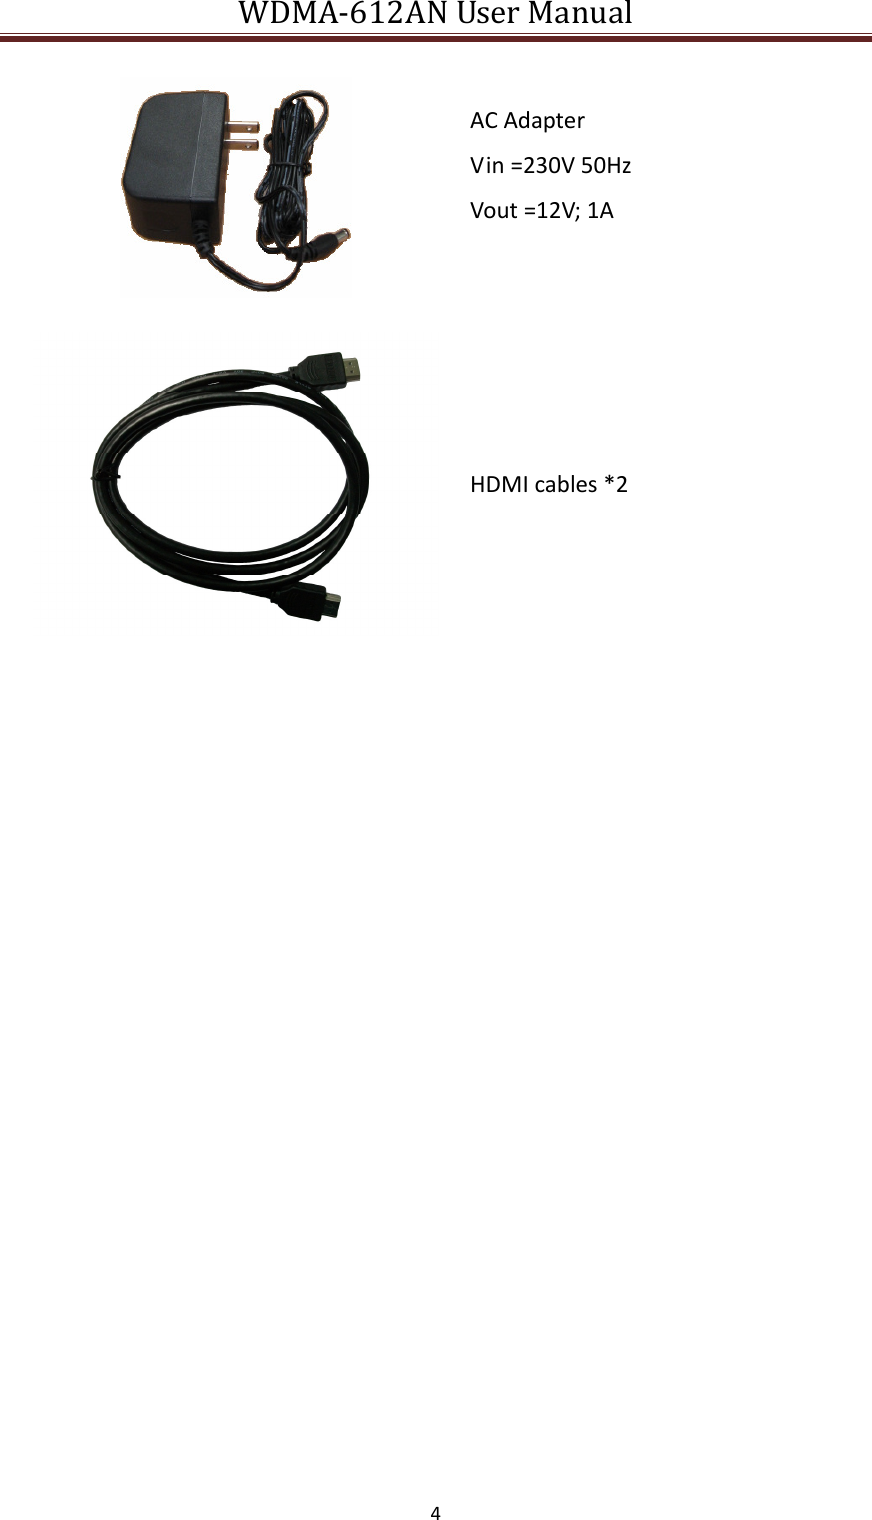 WDMA-612AN User Manual   4     AC Adapter Vin =230V 50Hz Vout =12V; 1A   HDMI cables *2              